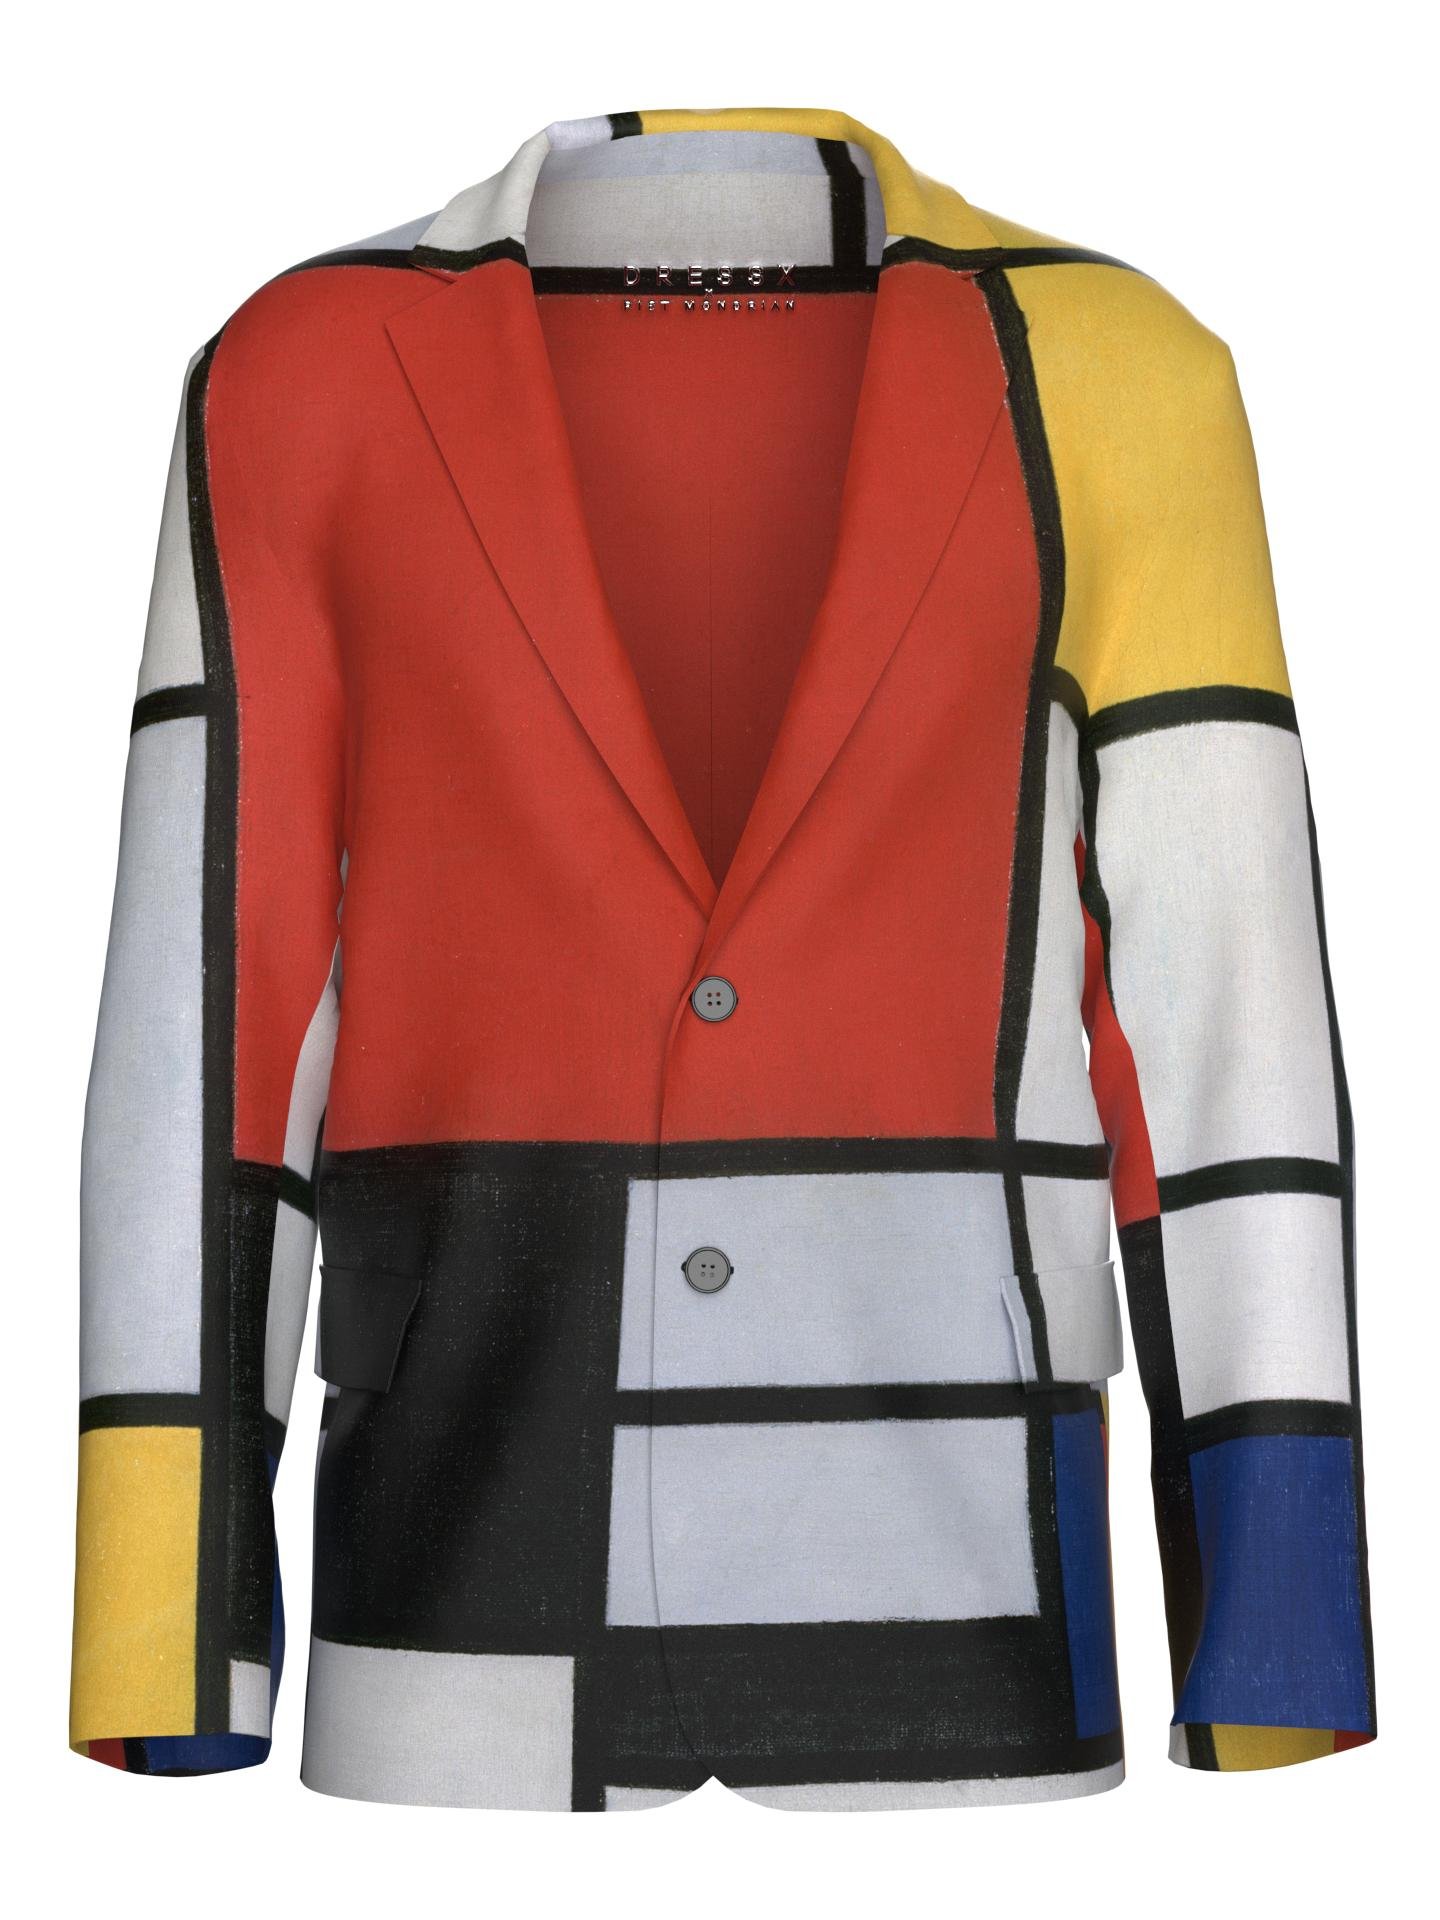 Blazer-Composition with Red, Yellow, Blue and Black by DRESSX